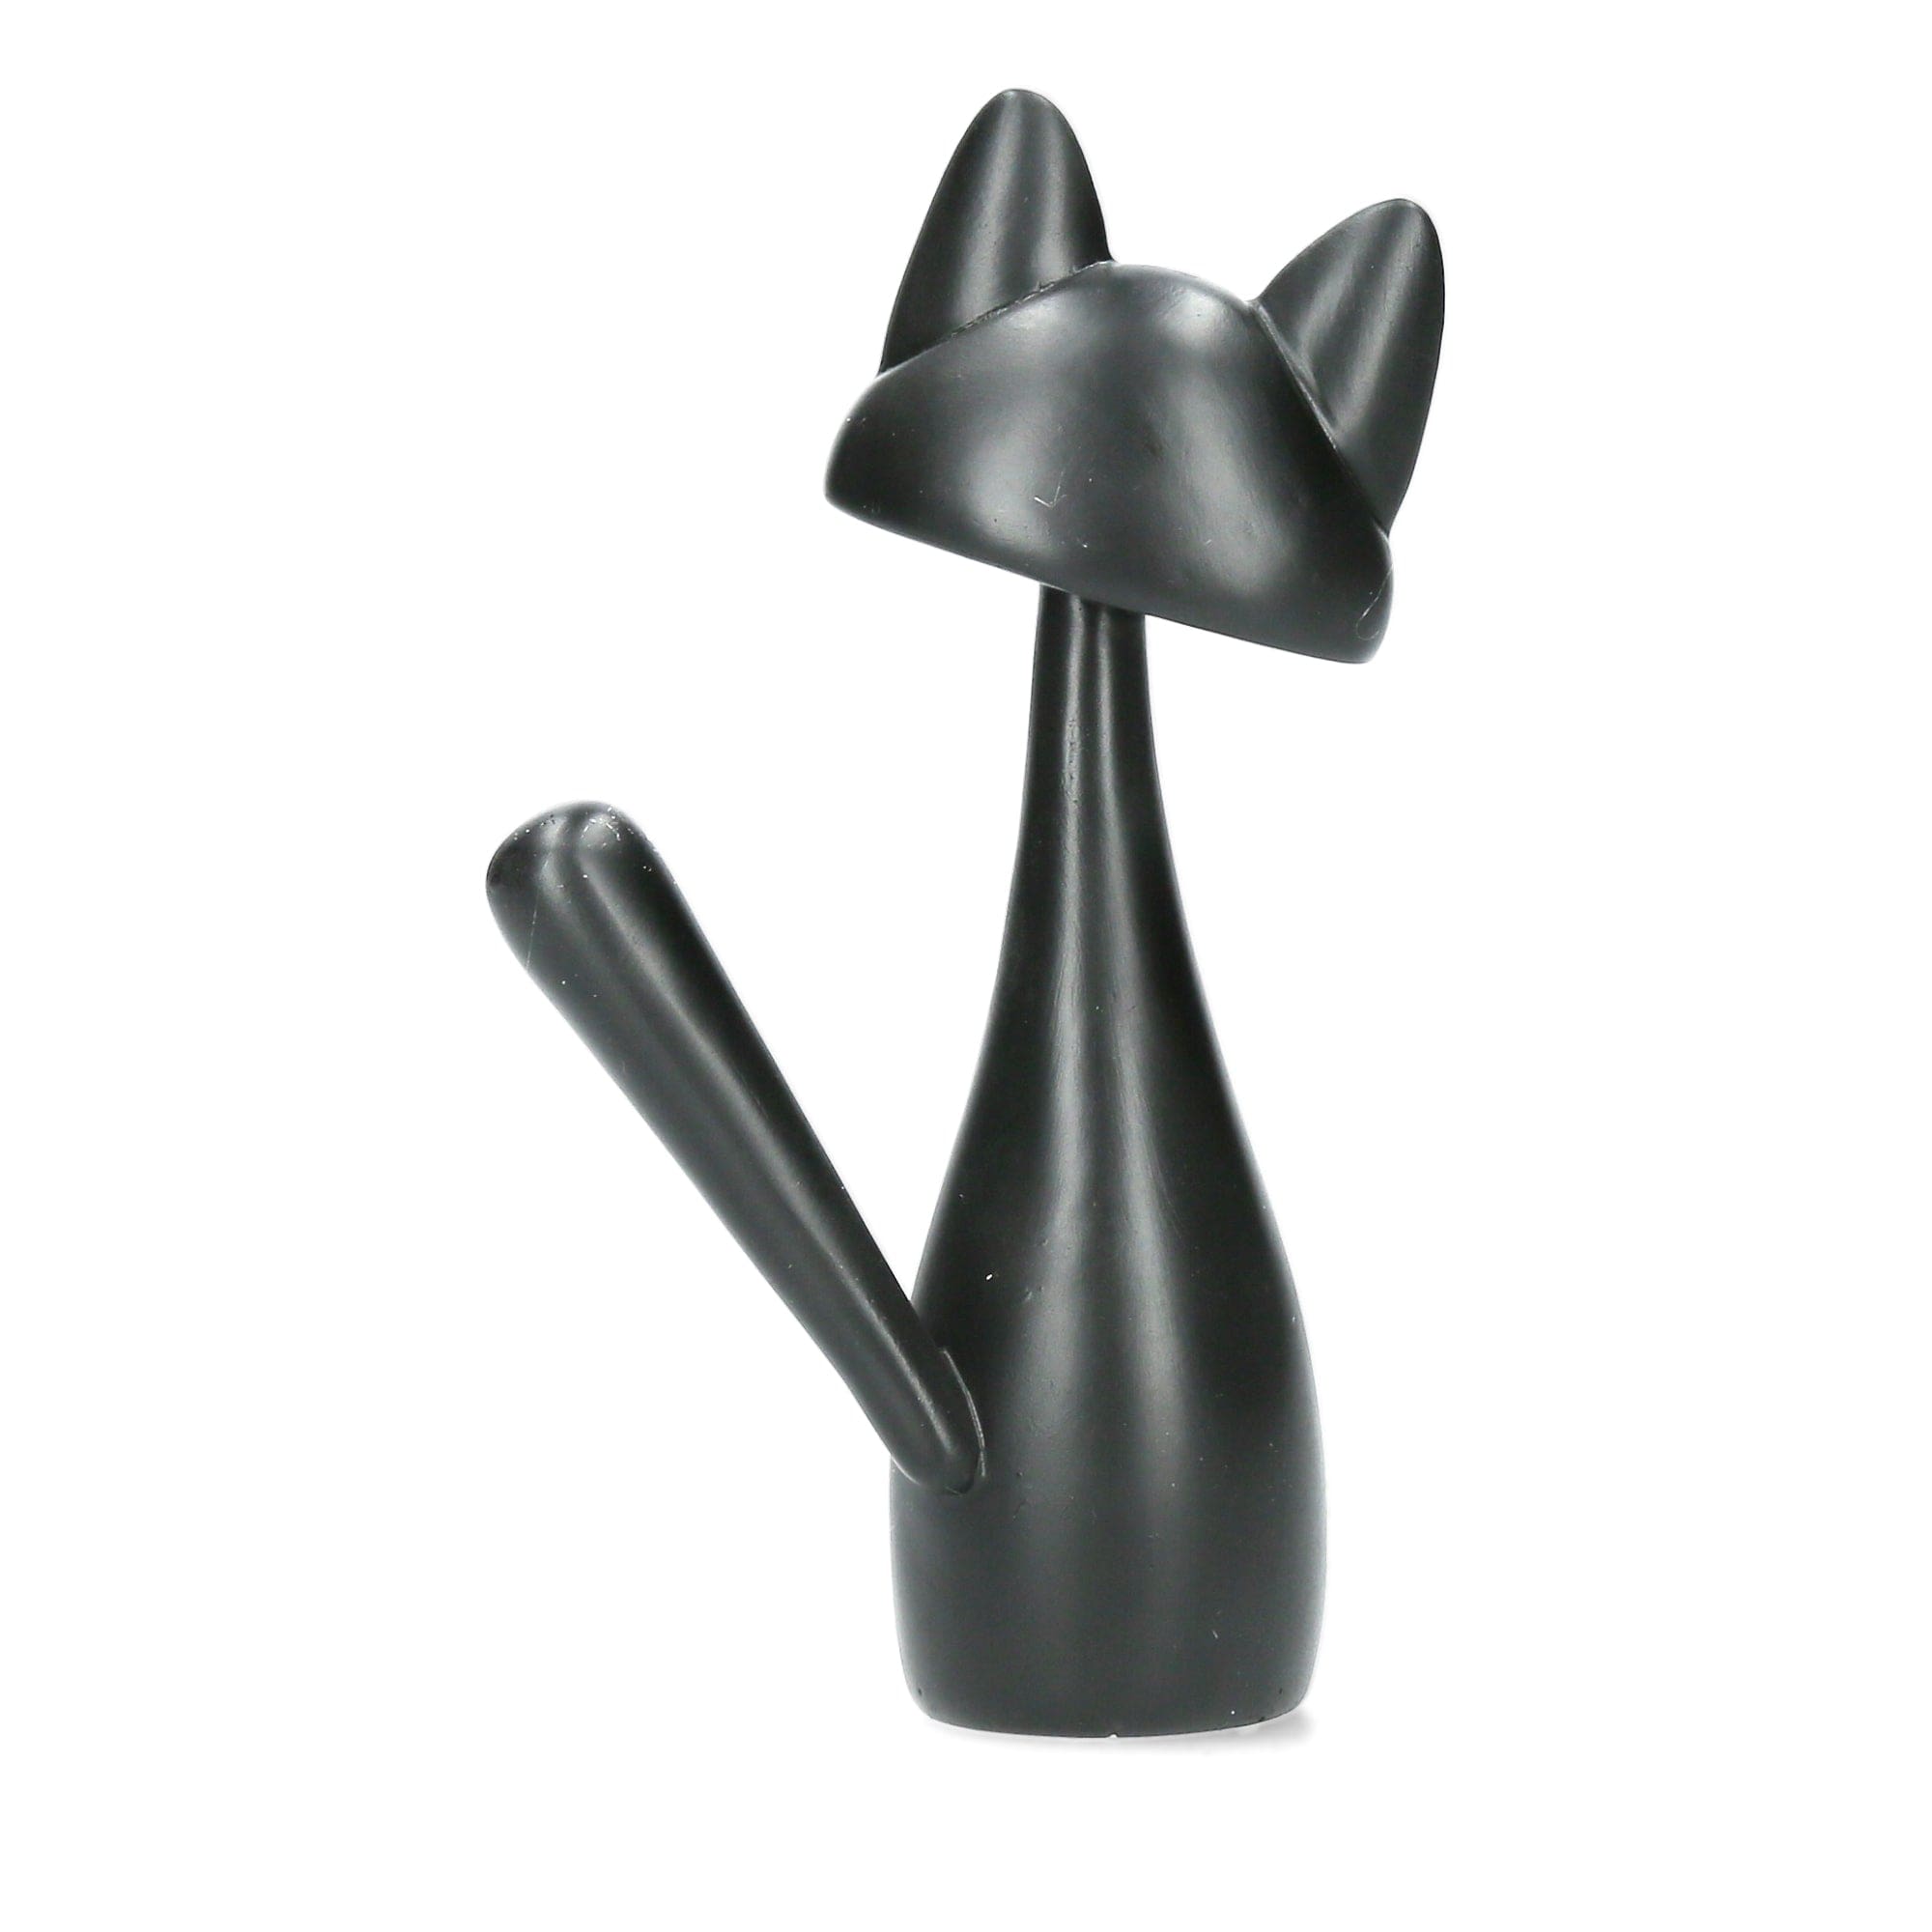 Statue of a slender cat with rings - Decoration